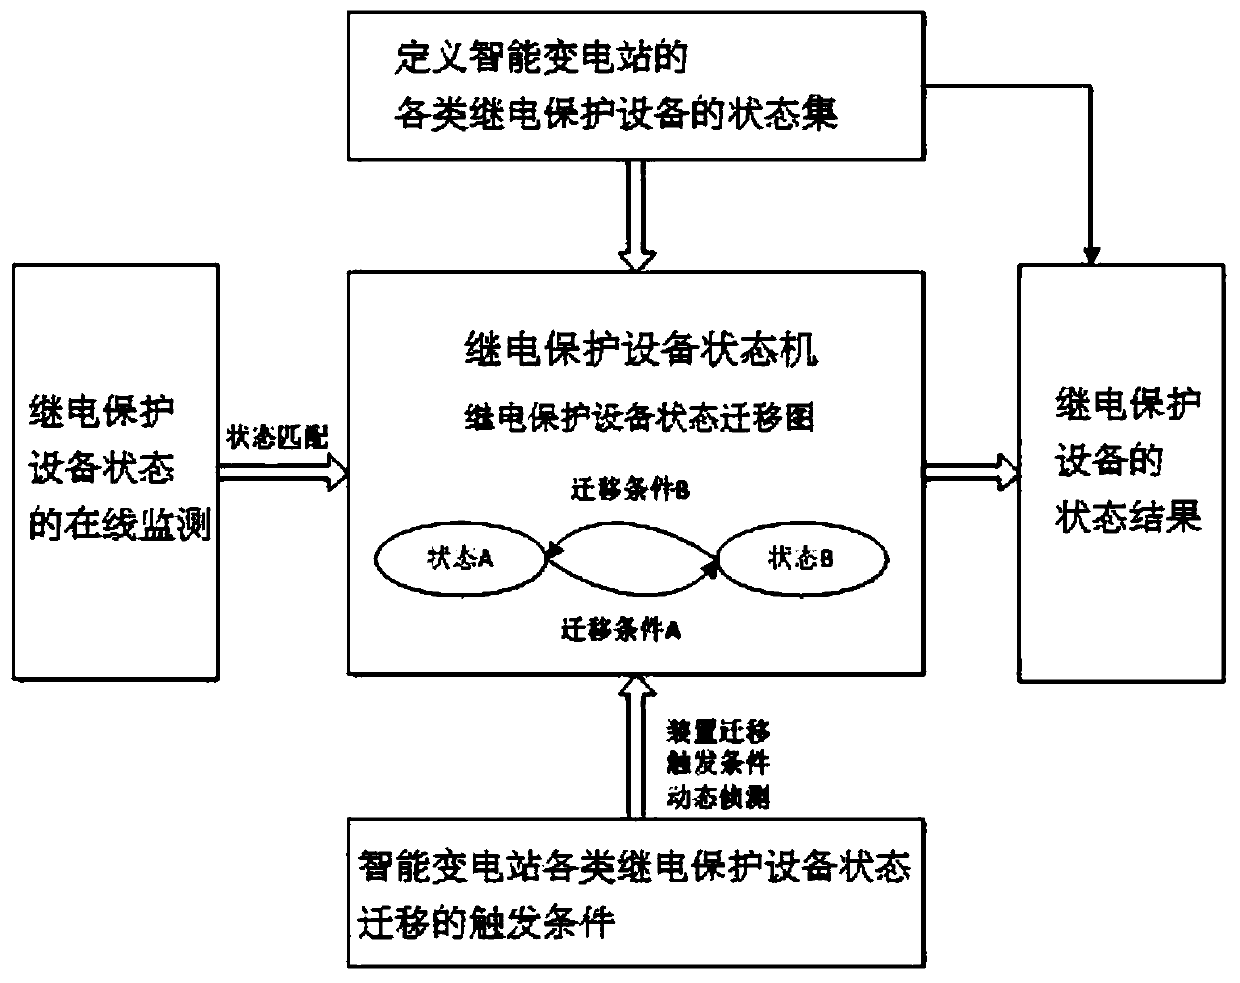 Dynamic control method for state machine of relay protection equipment of intelligent substation